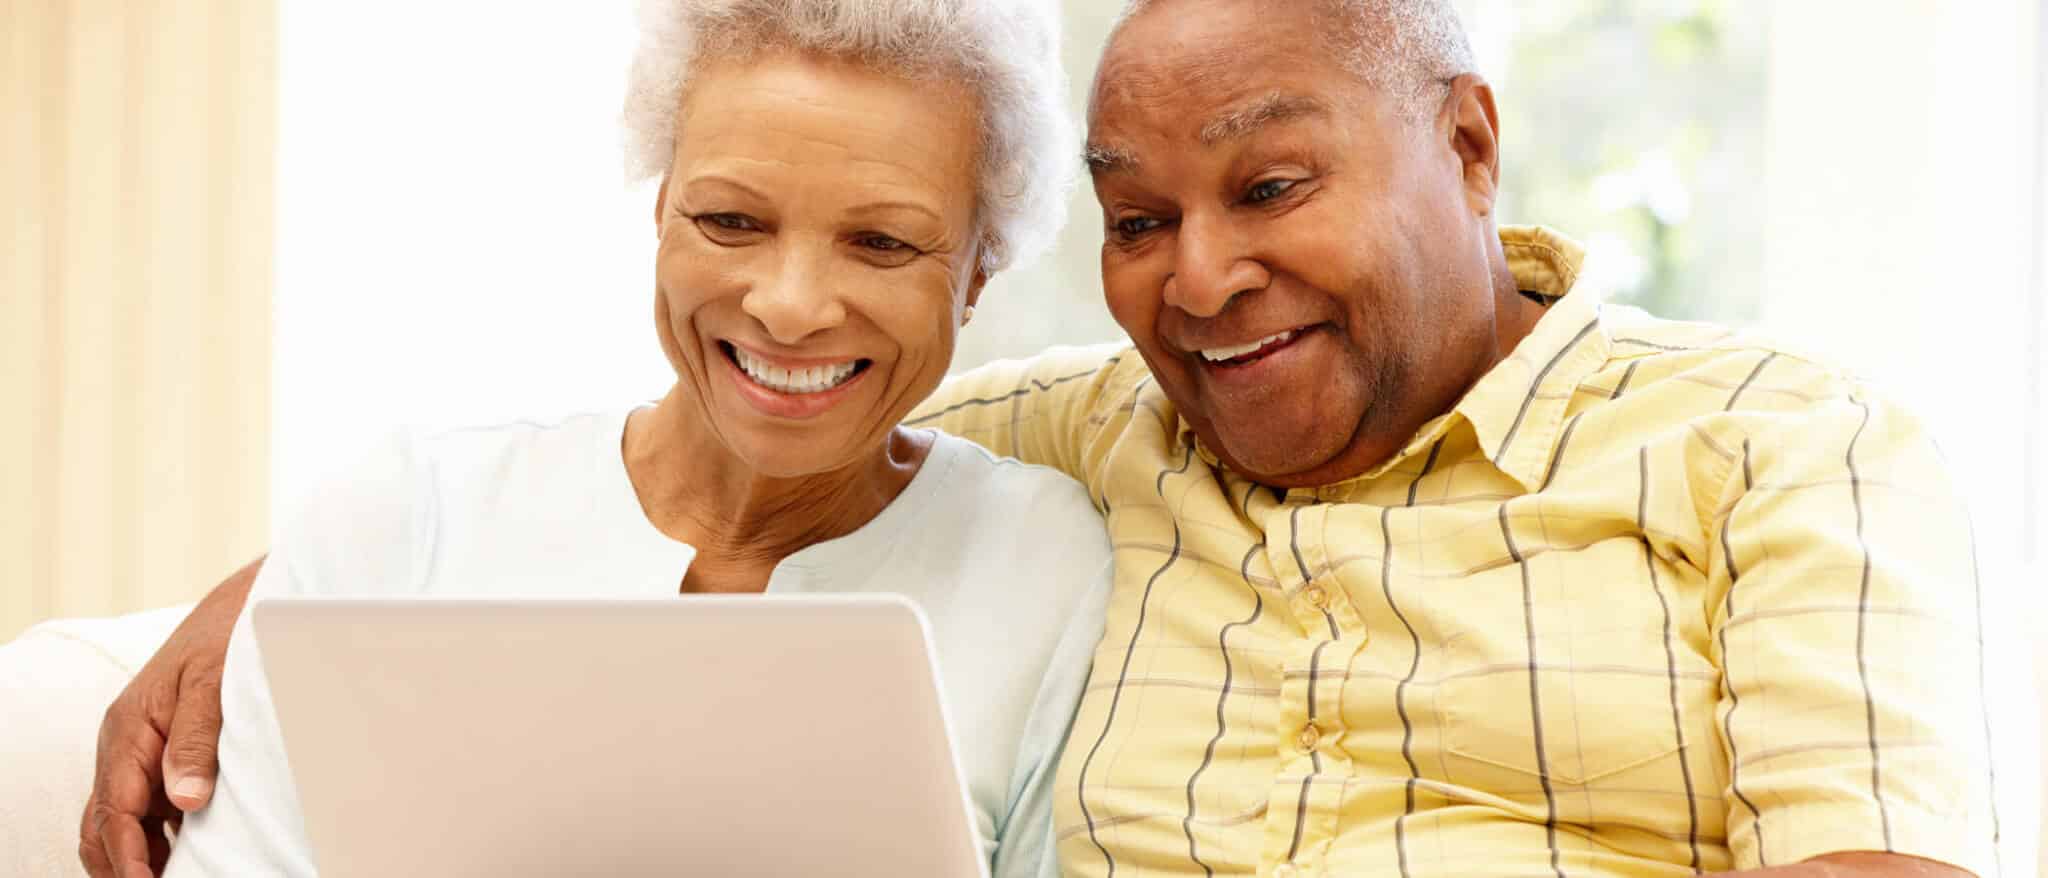 Smiling senior couple sit on couch together looking at laptop.